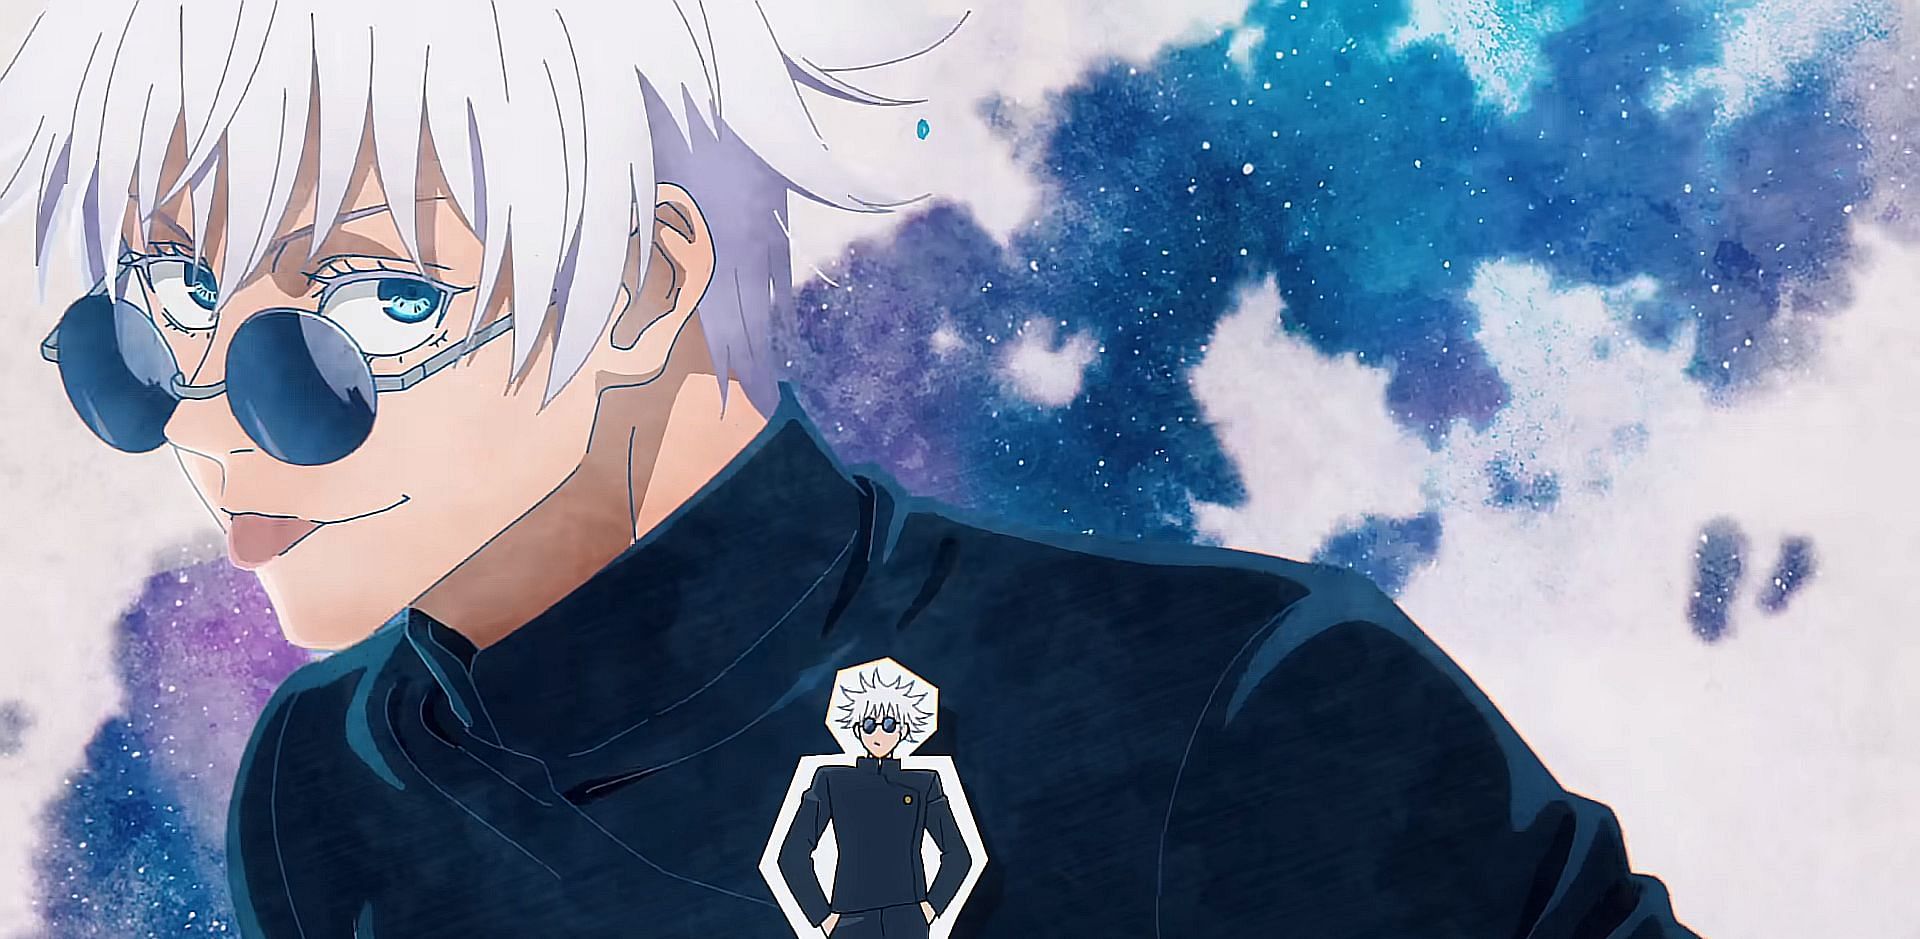 Gojo appearing against a starry background (Image via MAPPA)